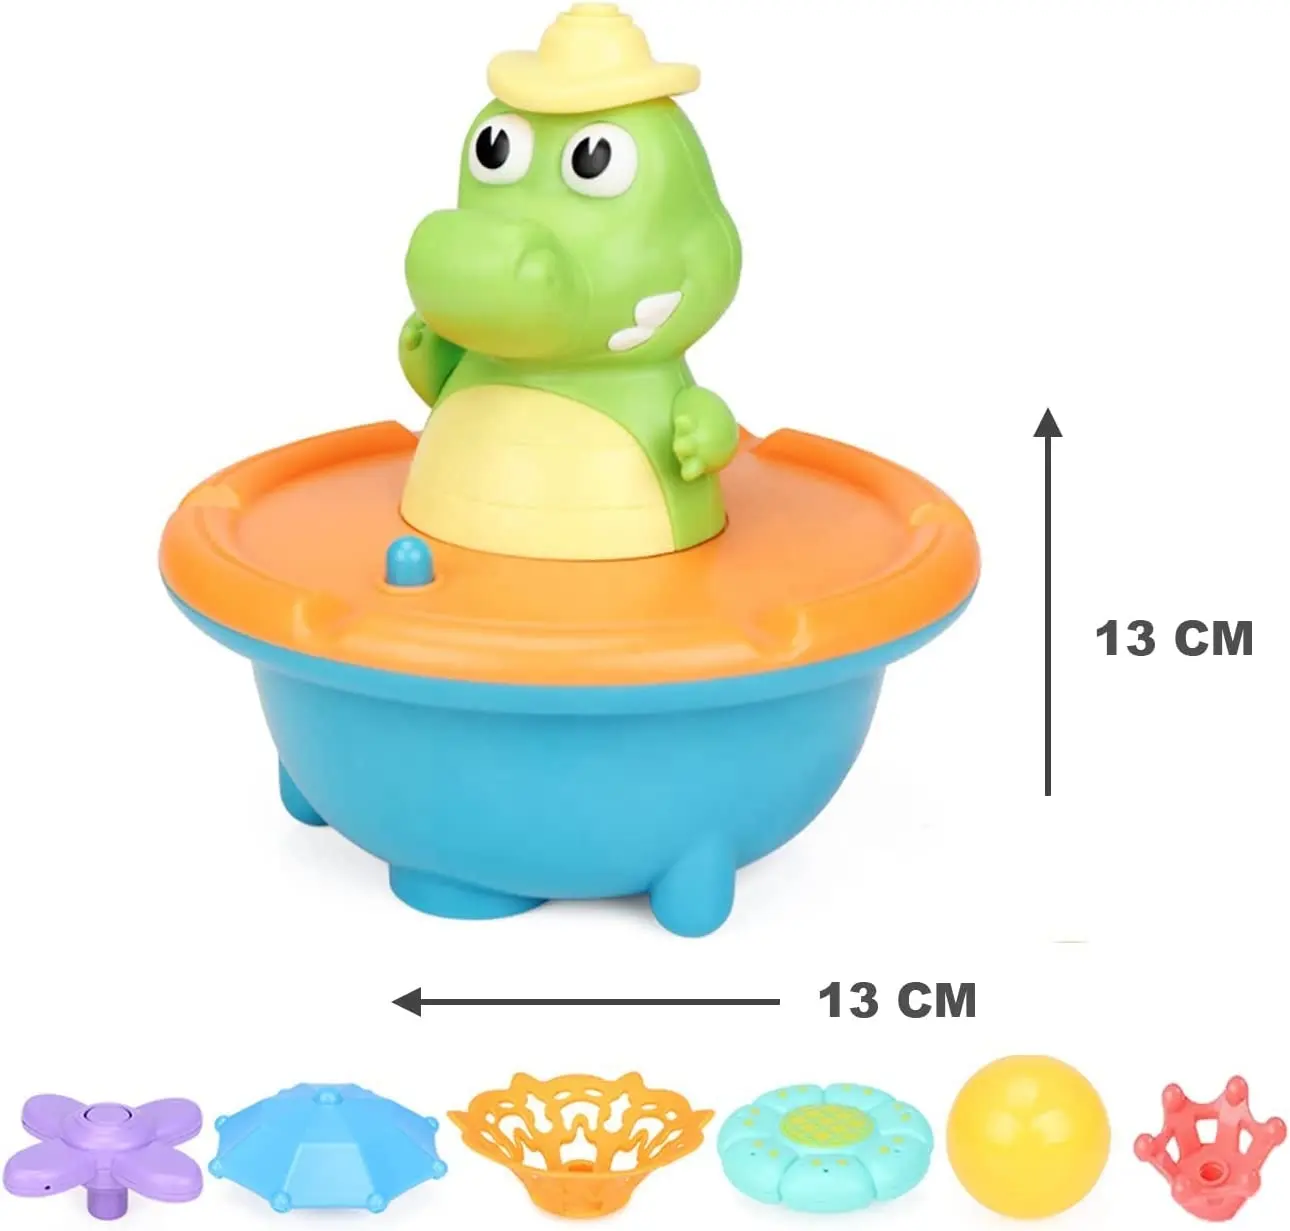 Hot Selling Crocodile Bath Toys with 5 Sprinkler Accessories Baby Bath Toys For Toddlers